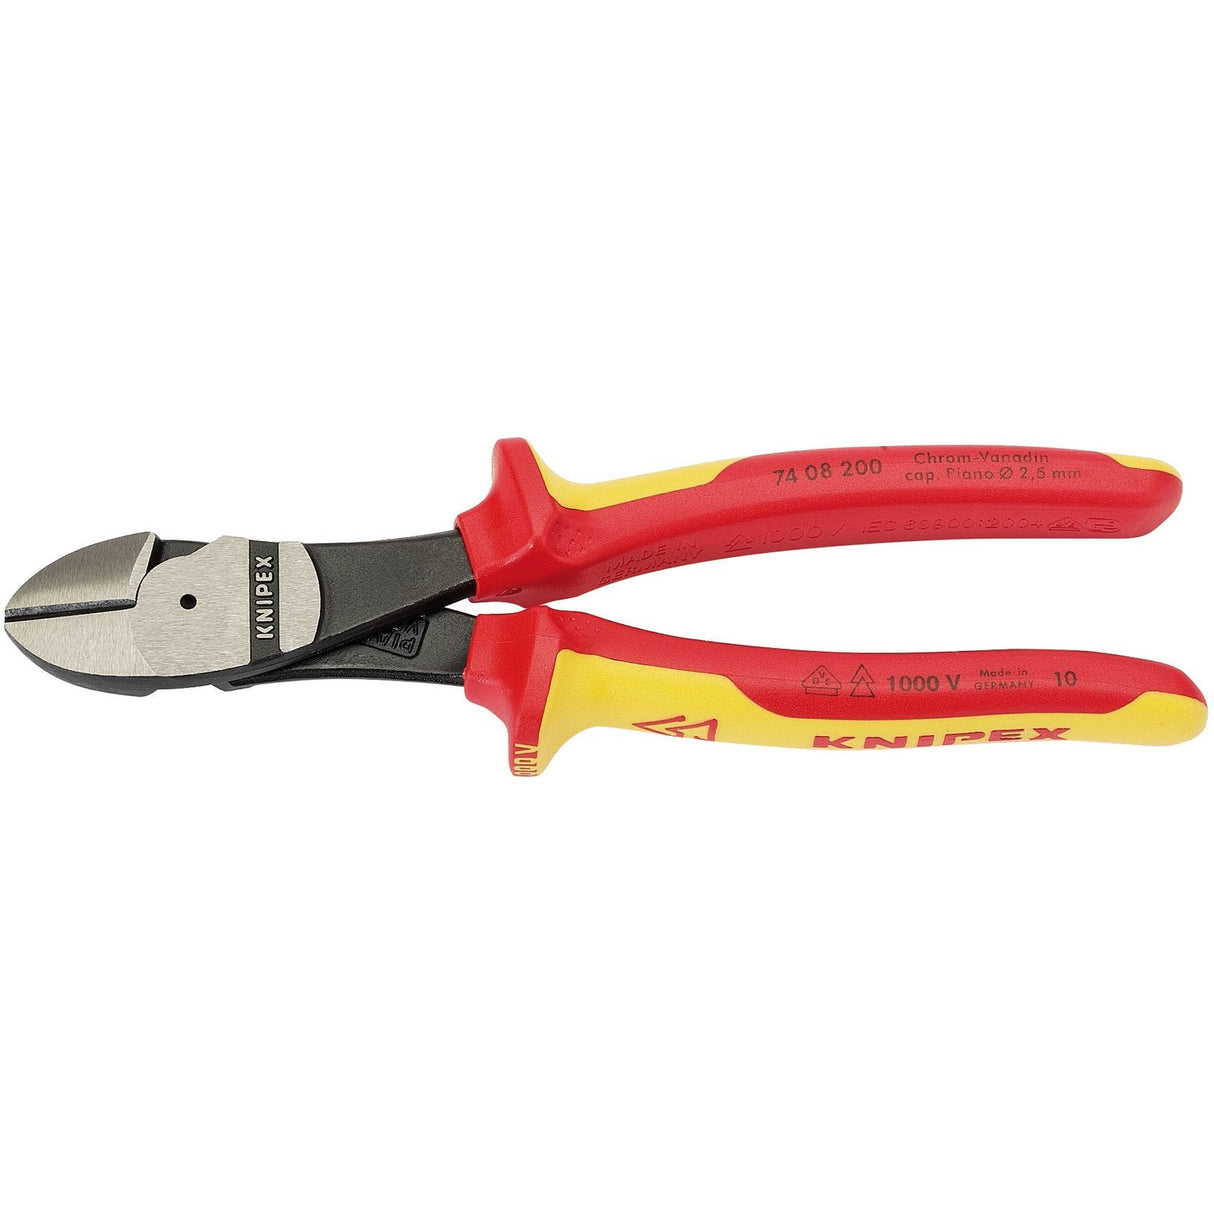 Draper Knipex 74 08 200Uksbe Vde Fully Insulated High Leverage Diagonal Side Cutters, 200mm - 74 08 200 UKSBE - Farming Parts